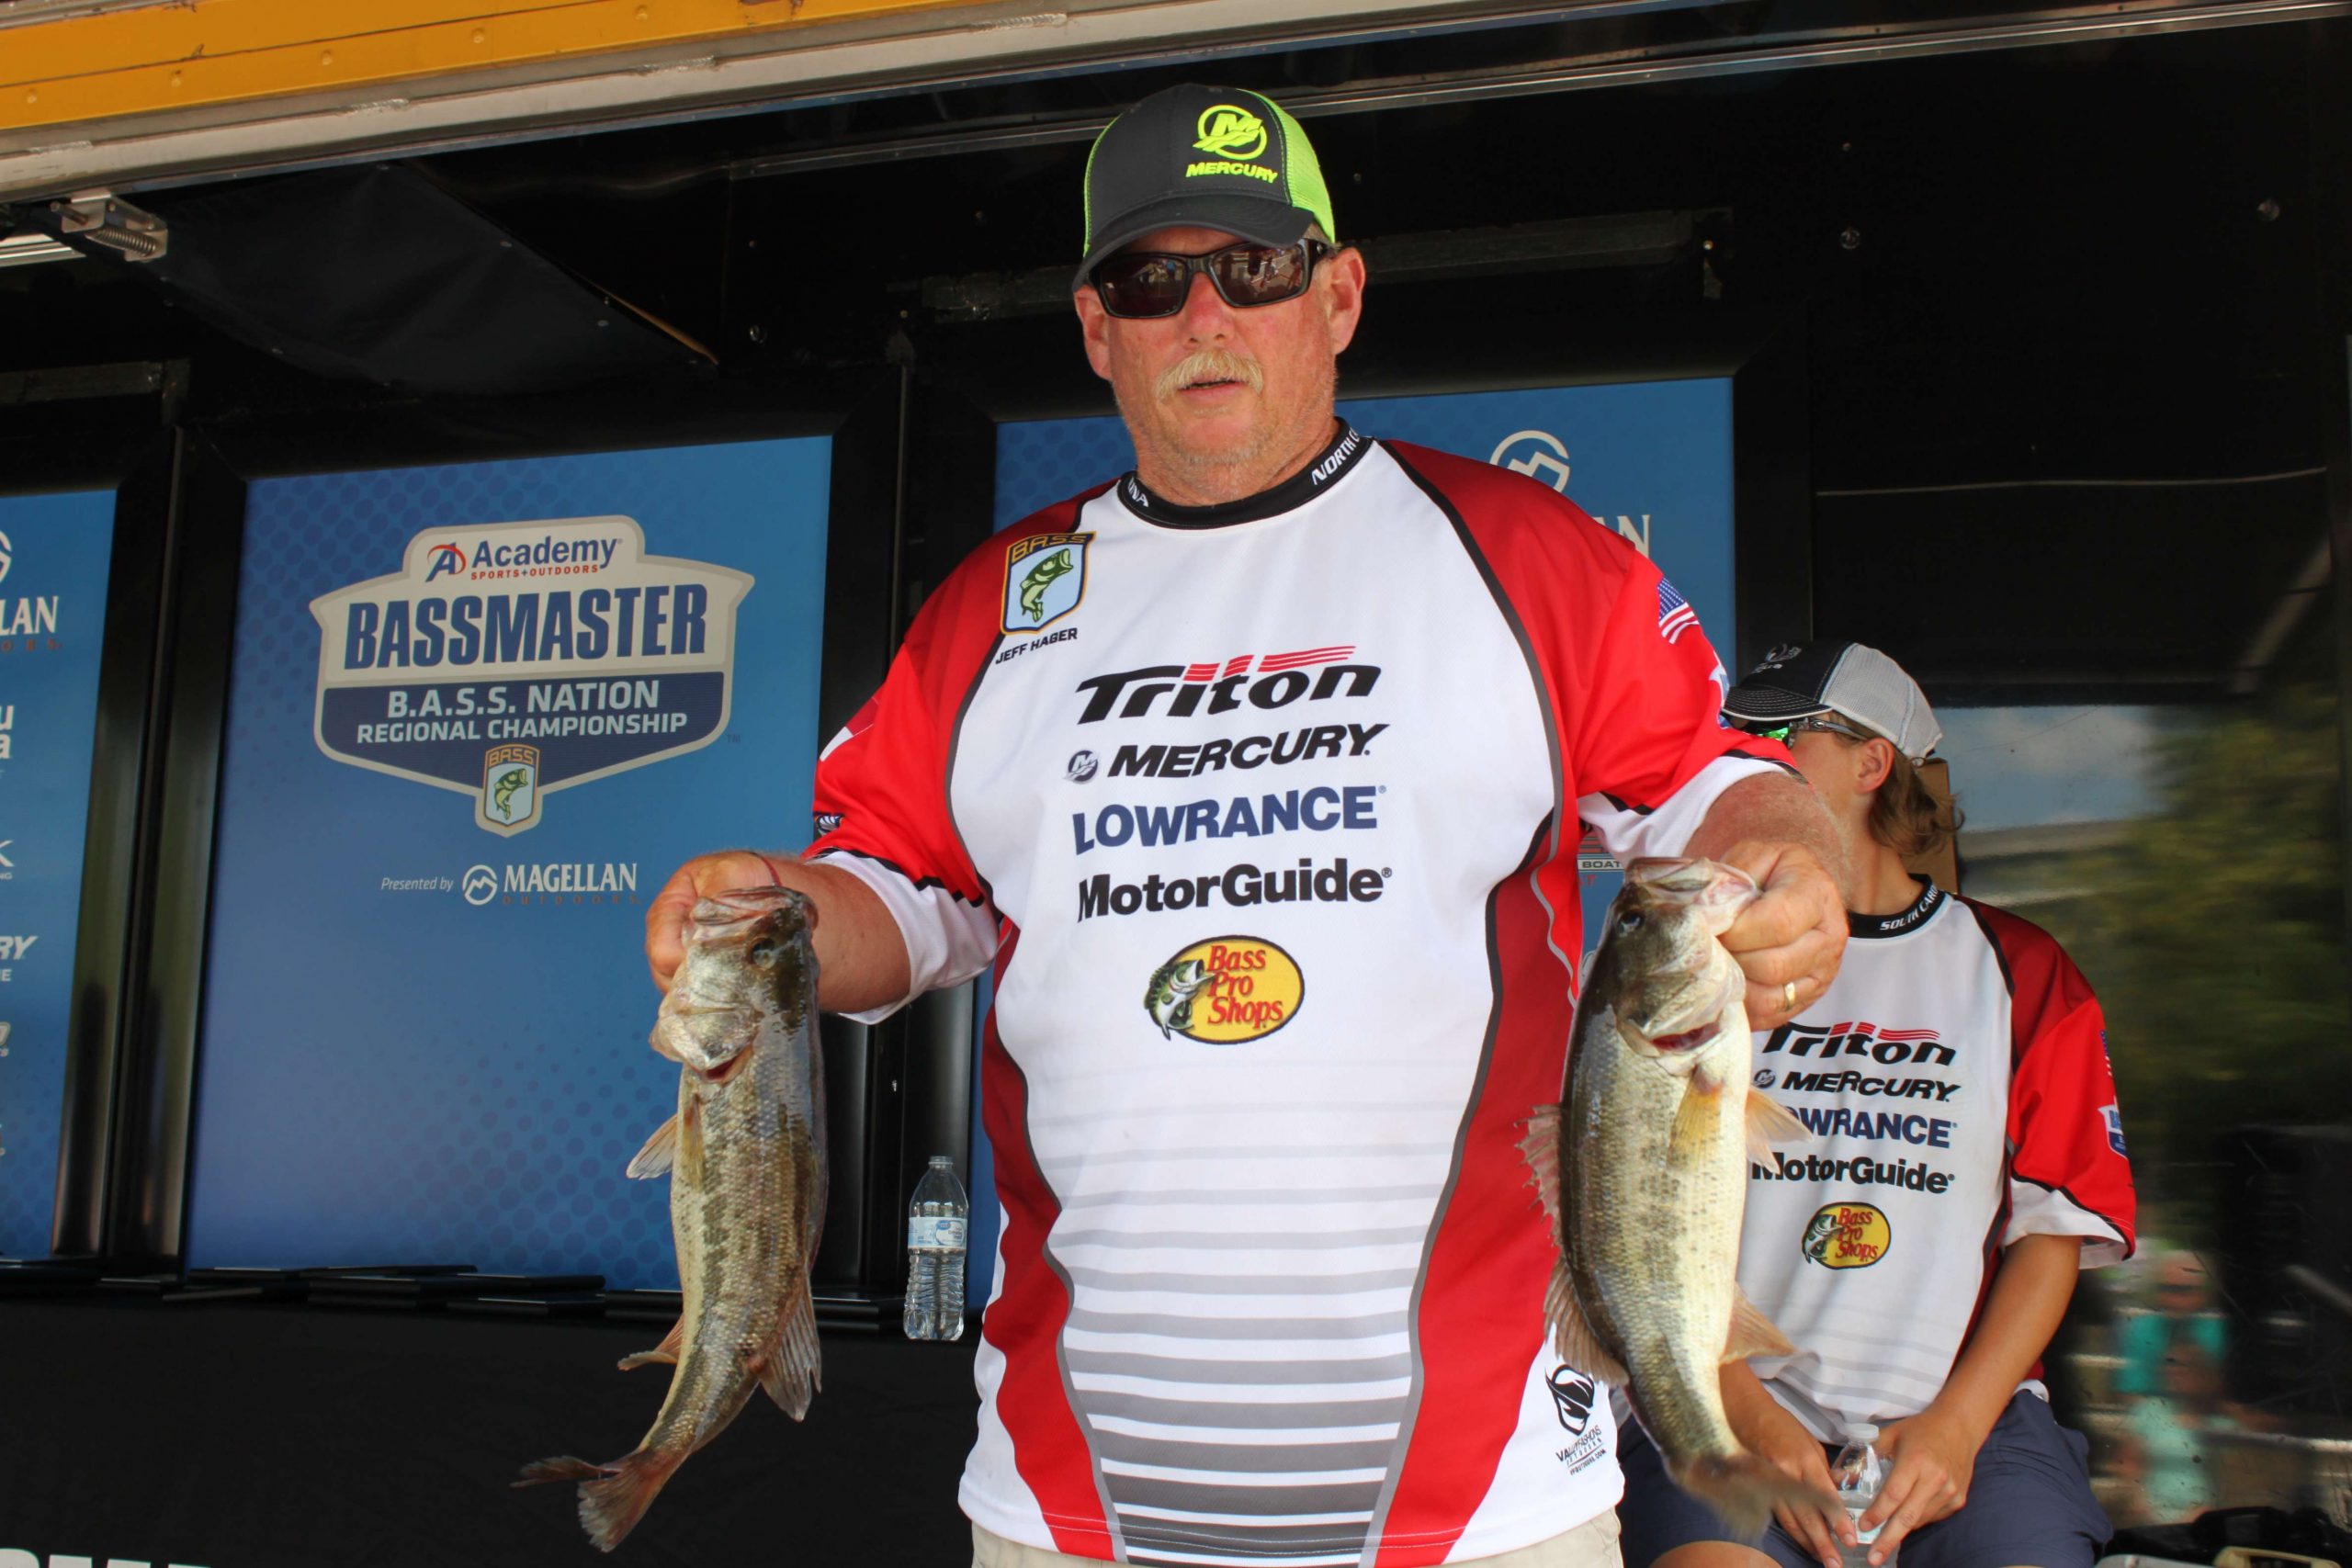 Jeff Hager of North Carolina caught 11-3 on Friday, which was second only to Hogan. He finished seventh among boaters with 24-7.